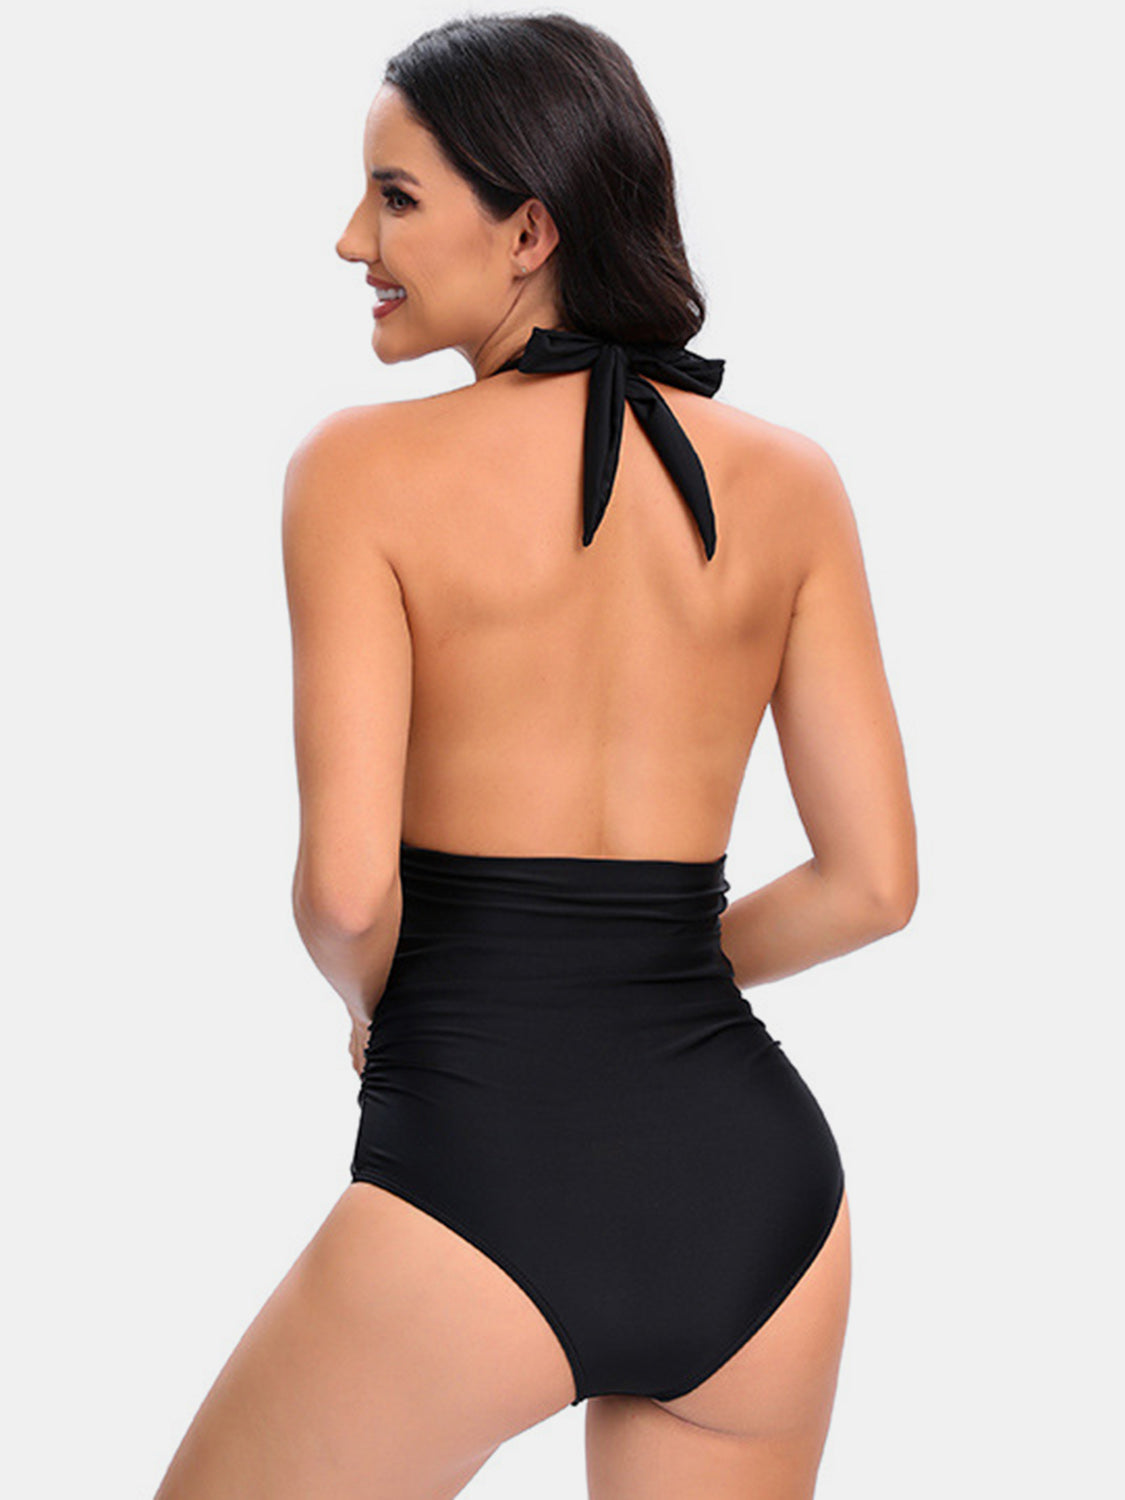 Sandy Paths Halter One Piece Swimsuit #Firefly Lane Boutique1